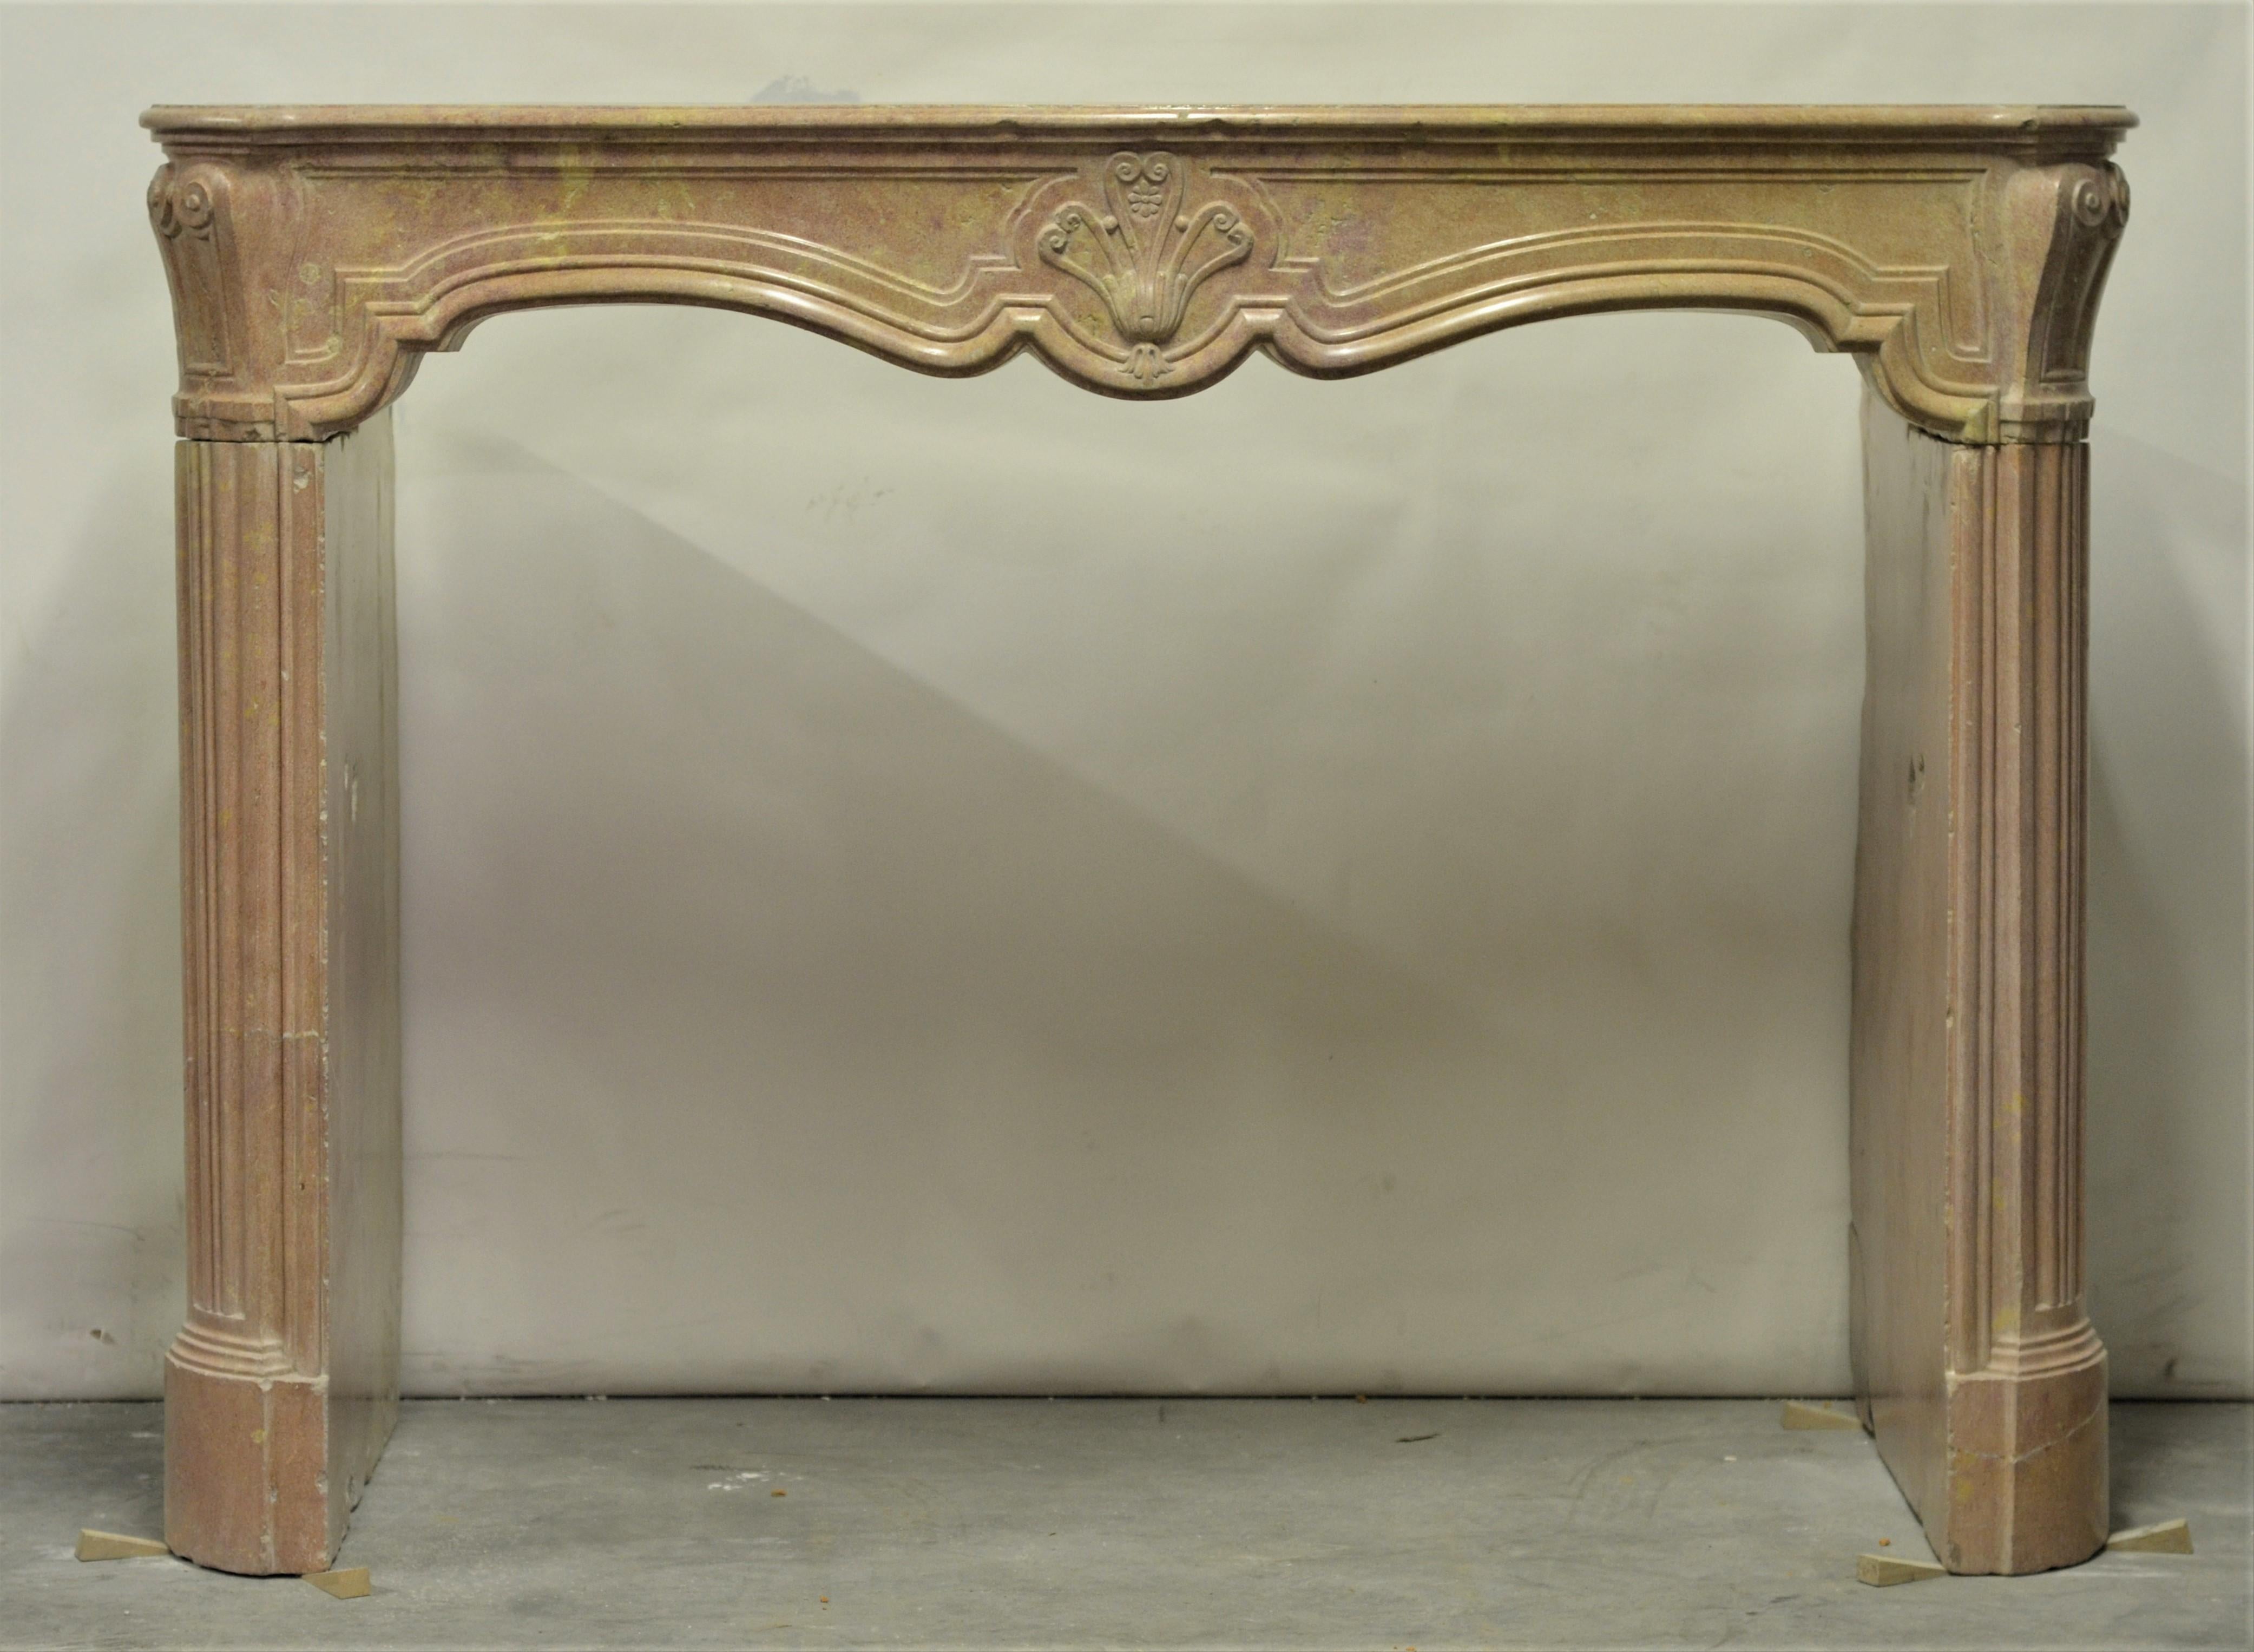 French antique Louis XV fireplace mantel, 18th Century.

This great looking mantel is made from 